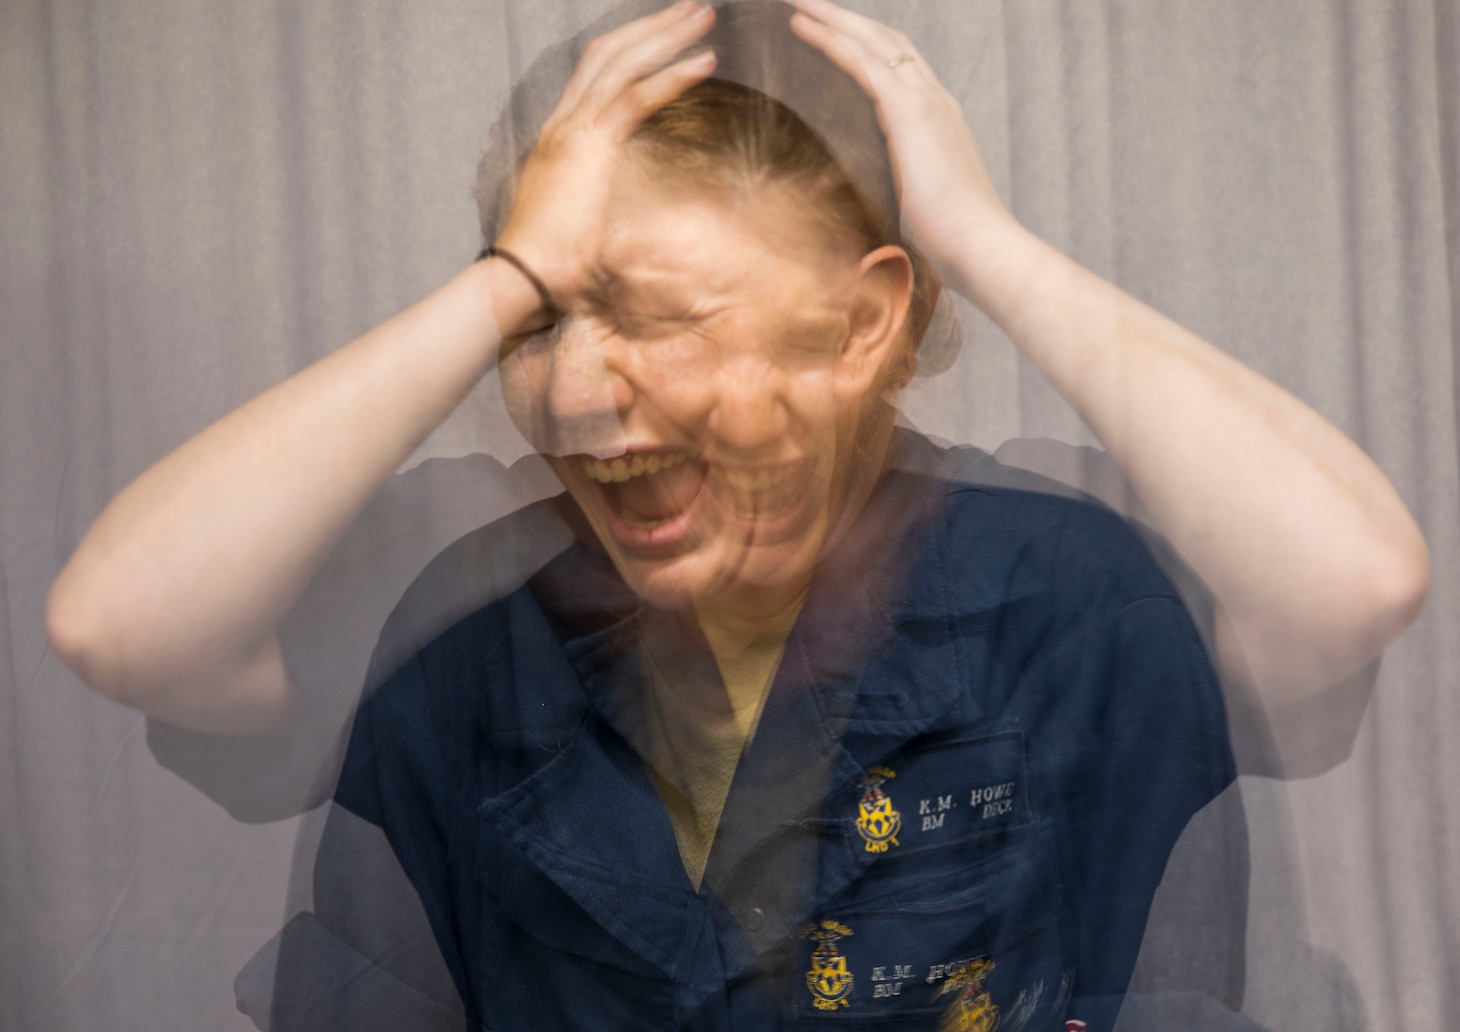 Blurred image of Sailor screaming and shaking head